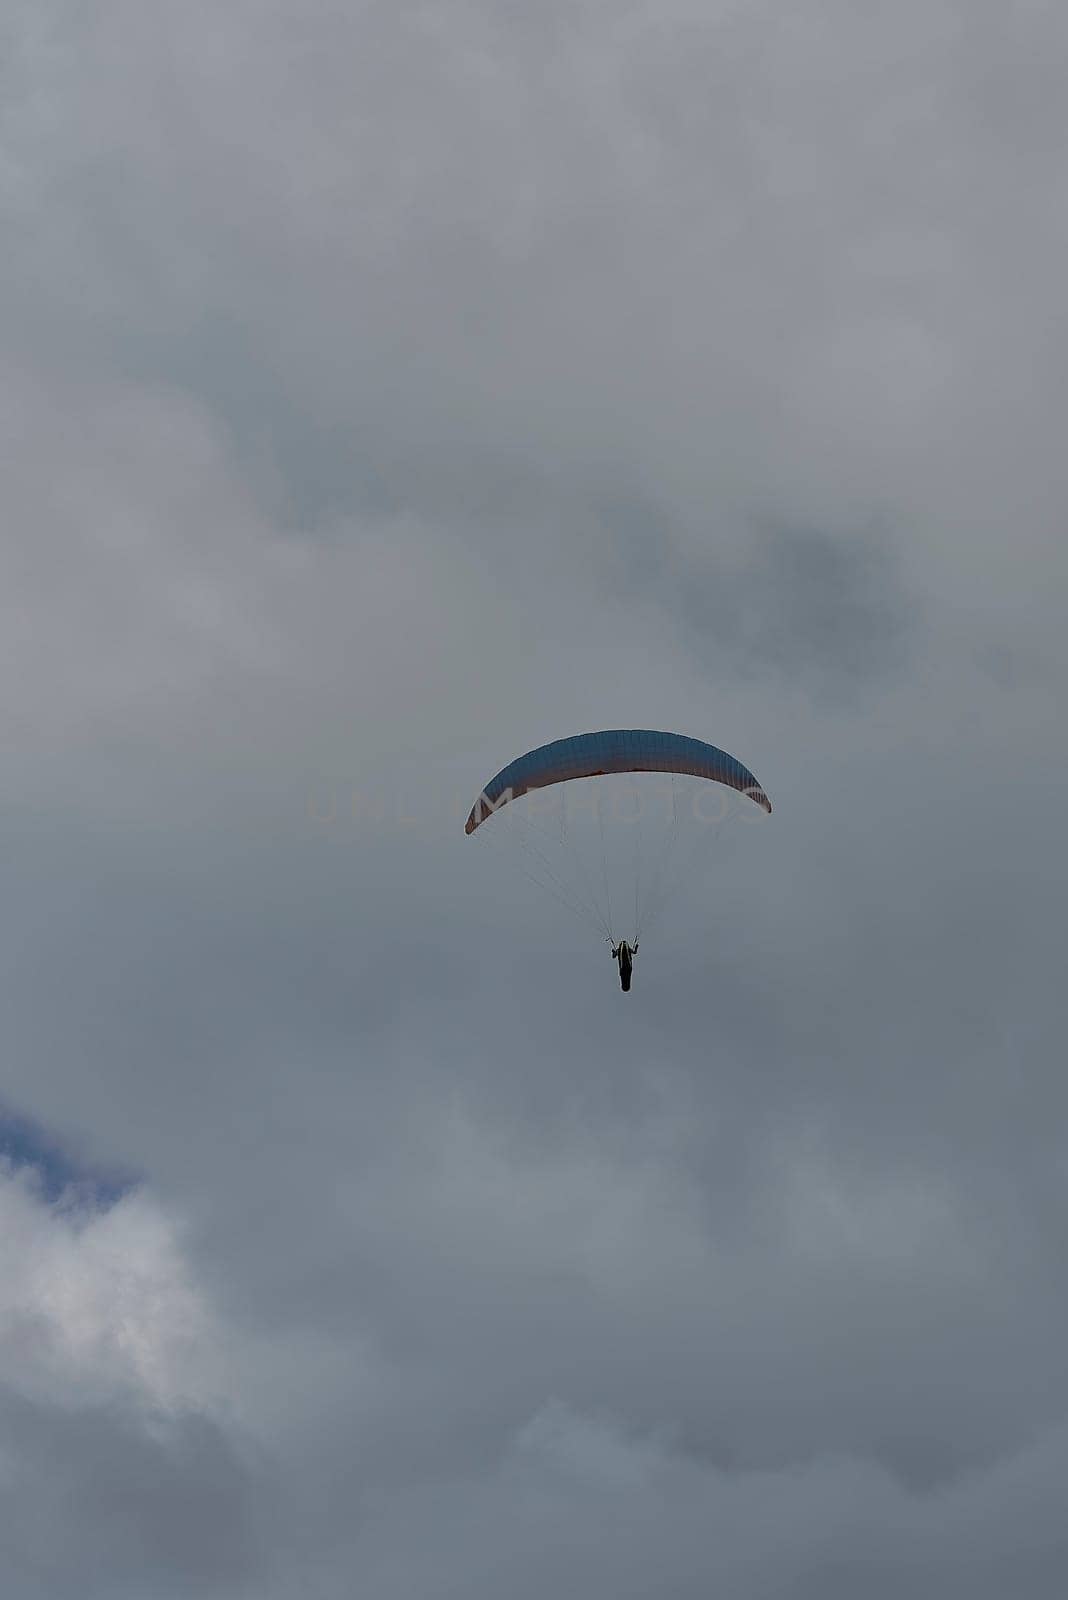 A person paragliding on a cloudy day by raul_ruiz